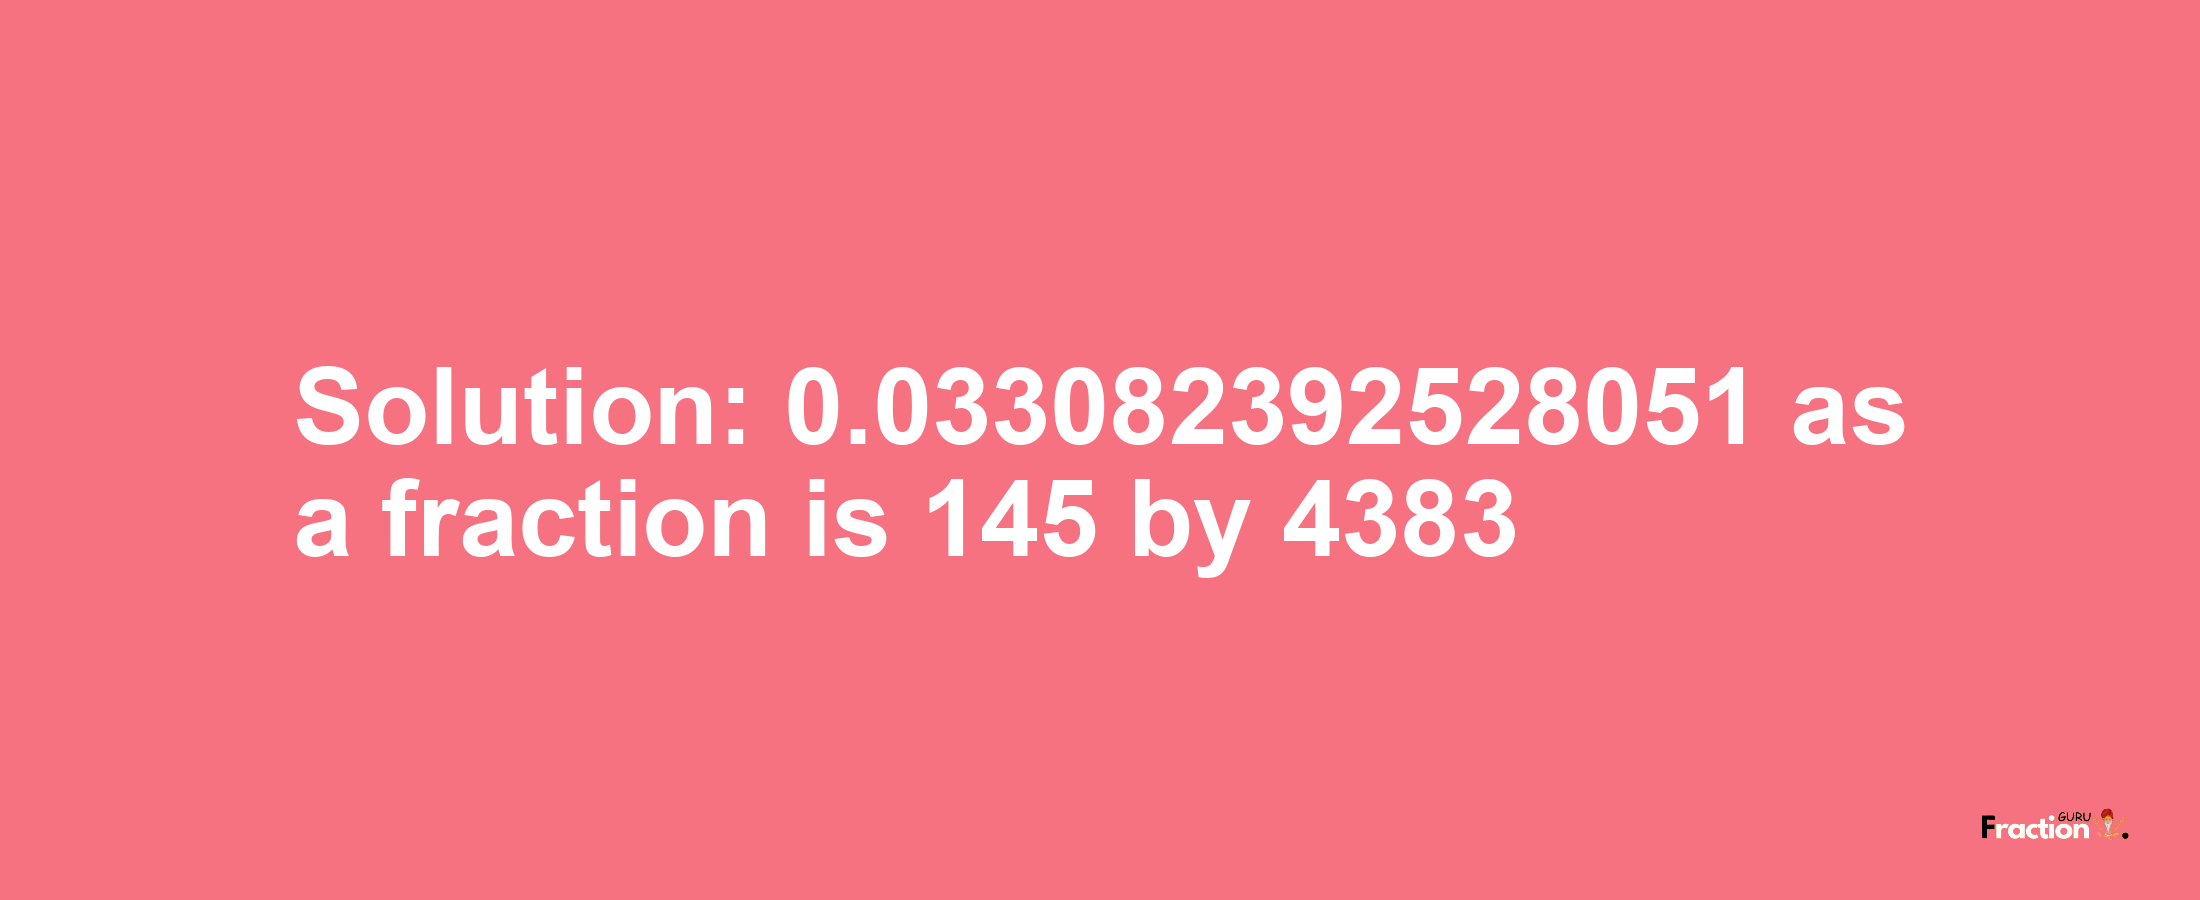 Solution:0.033082392528051 as a fraction is 145/4383